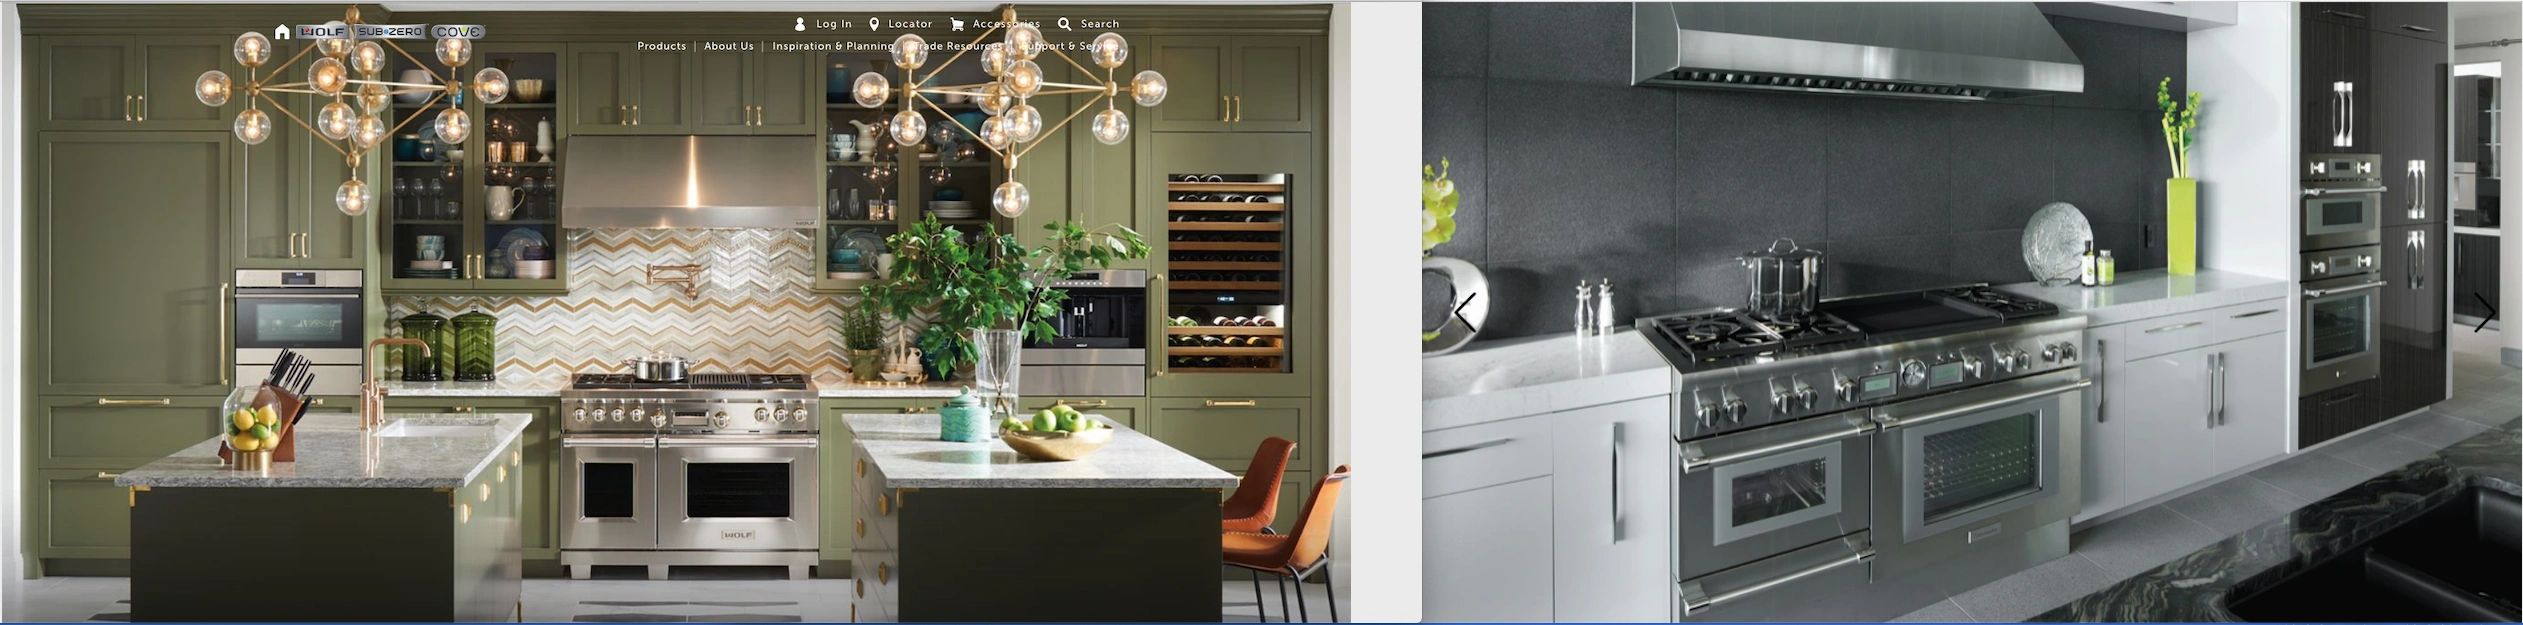 15 luxury kitchen appliances designers will be talking about next year -  Reviewed